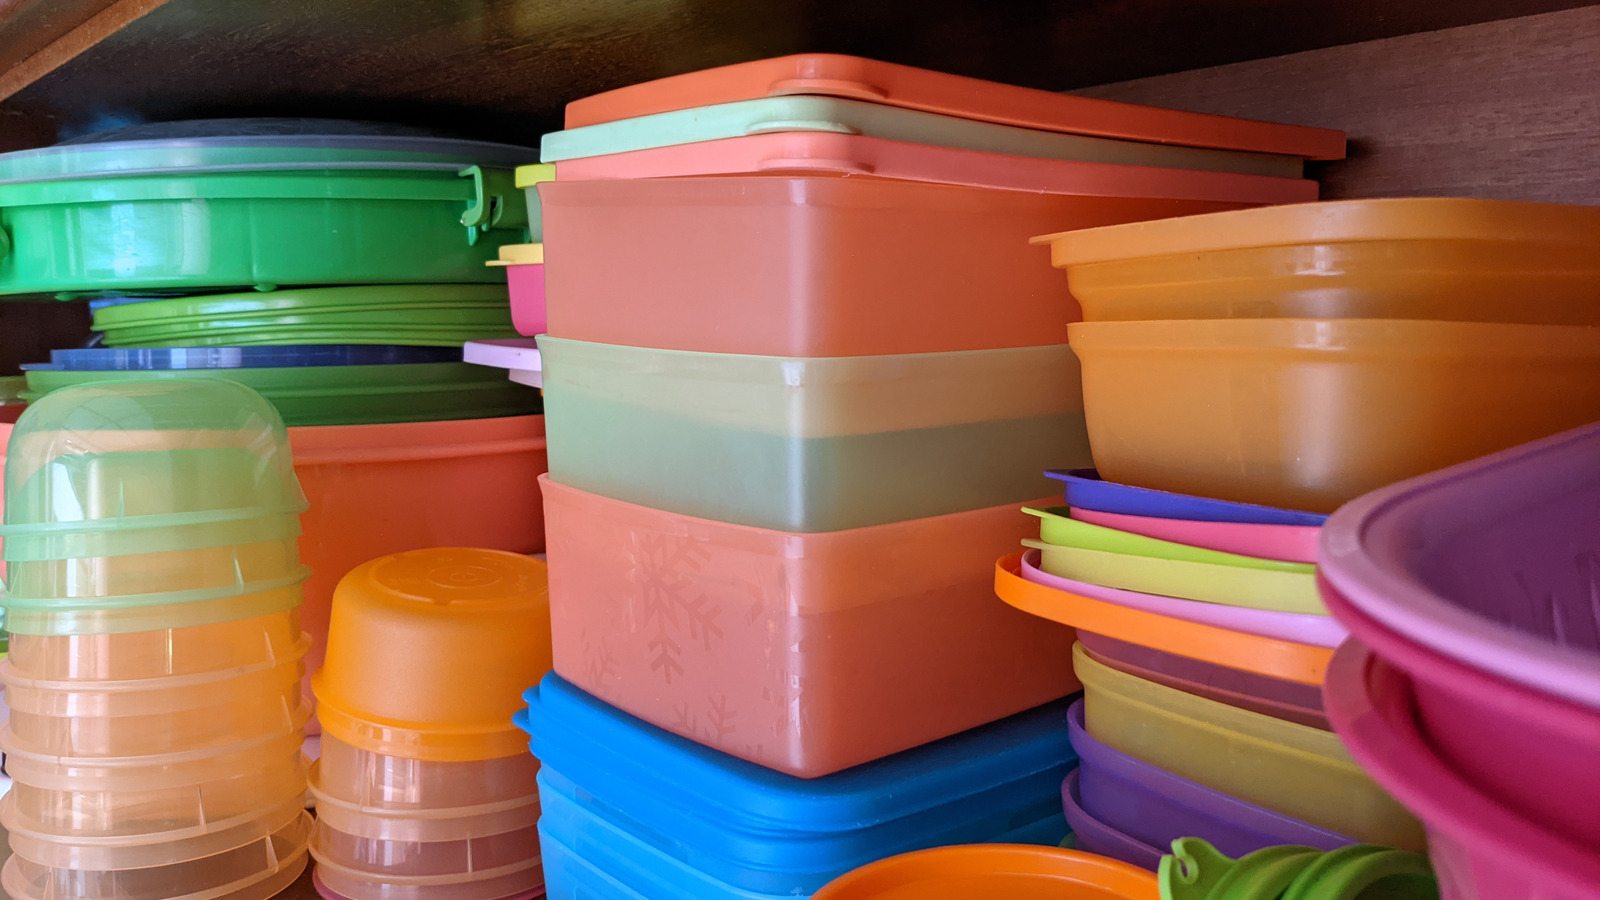 https://www.thedailymeal.com/img/gallery/heres-what-the-different-tupperware-symbols-actually-mean/l-intro-1665687569.jpg